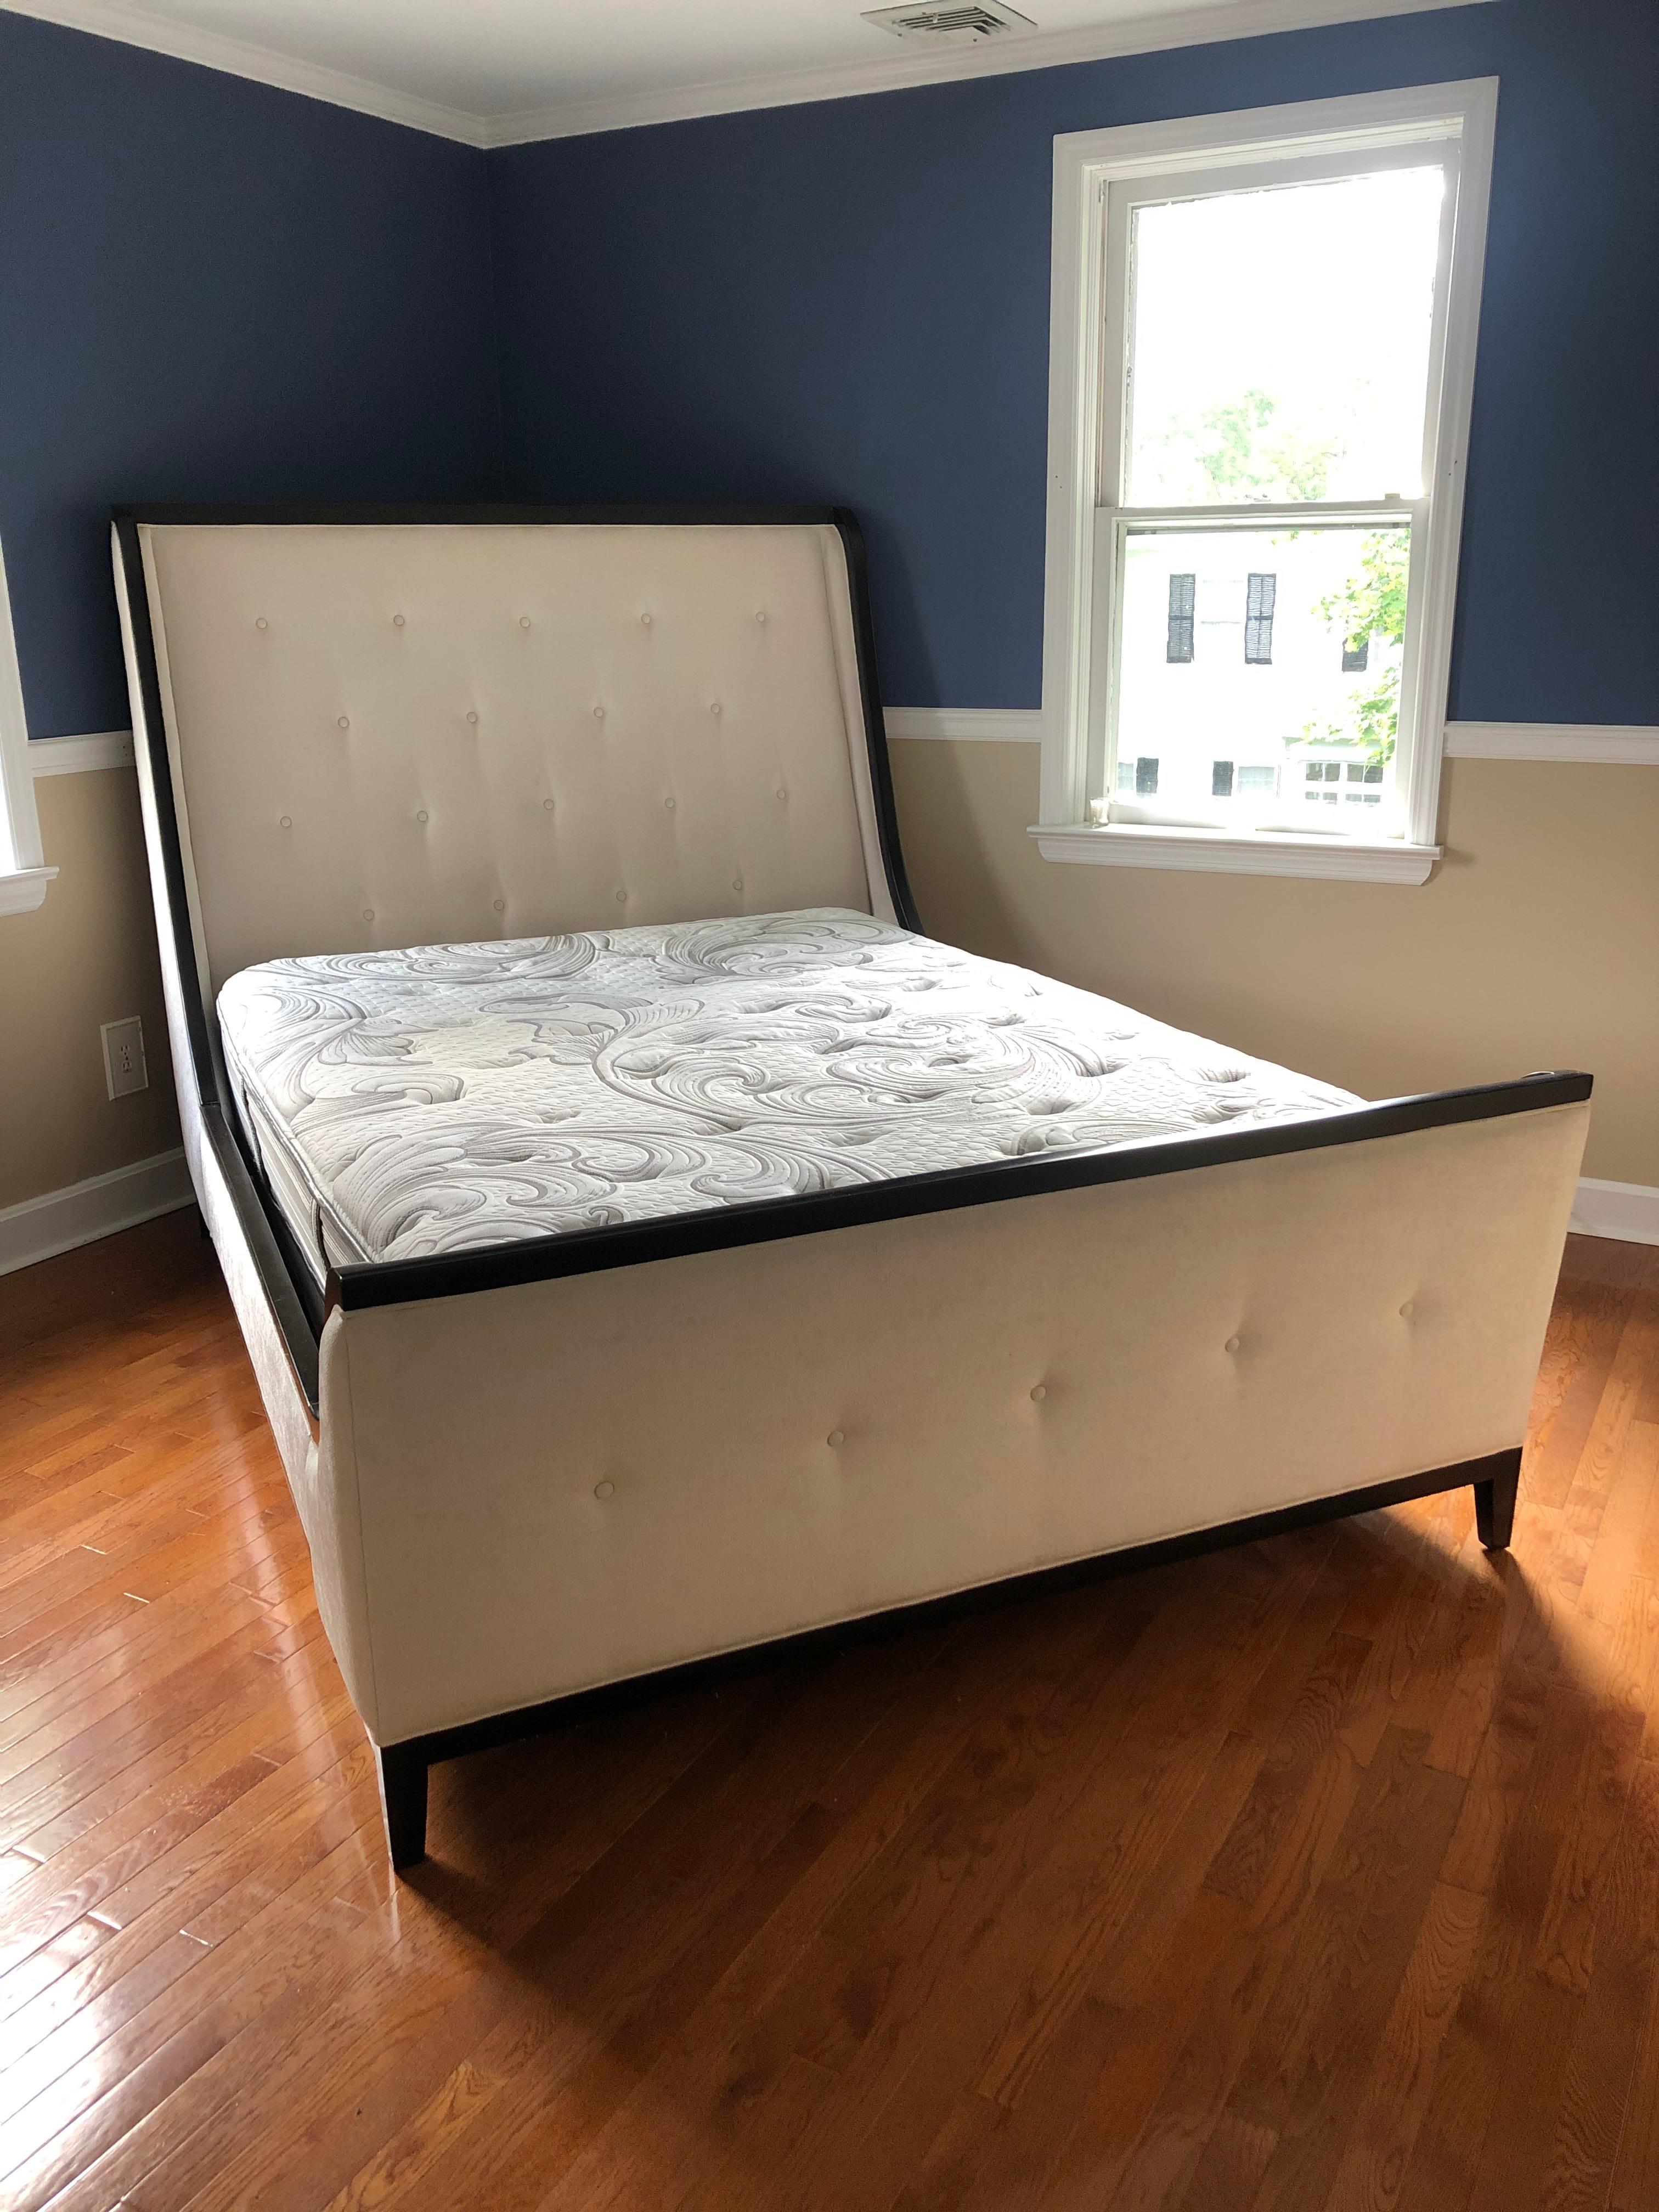 A super luxurious queen size sleigh bed fit for a Queen! Bed frame is upholstered in a cream plush chenille on headboard, footboard and side rails. The wood is ebonized and makes a gorgeous contrast to the upholstery.
Comes with box spring;